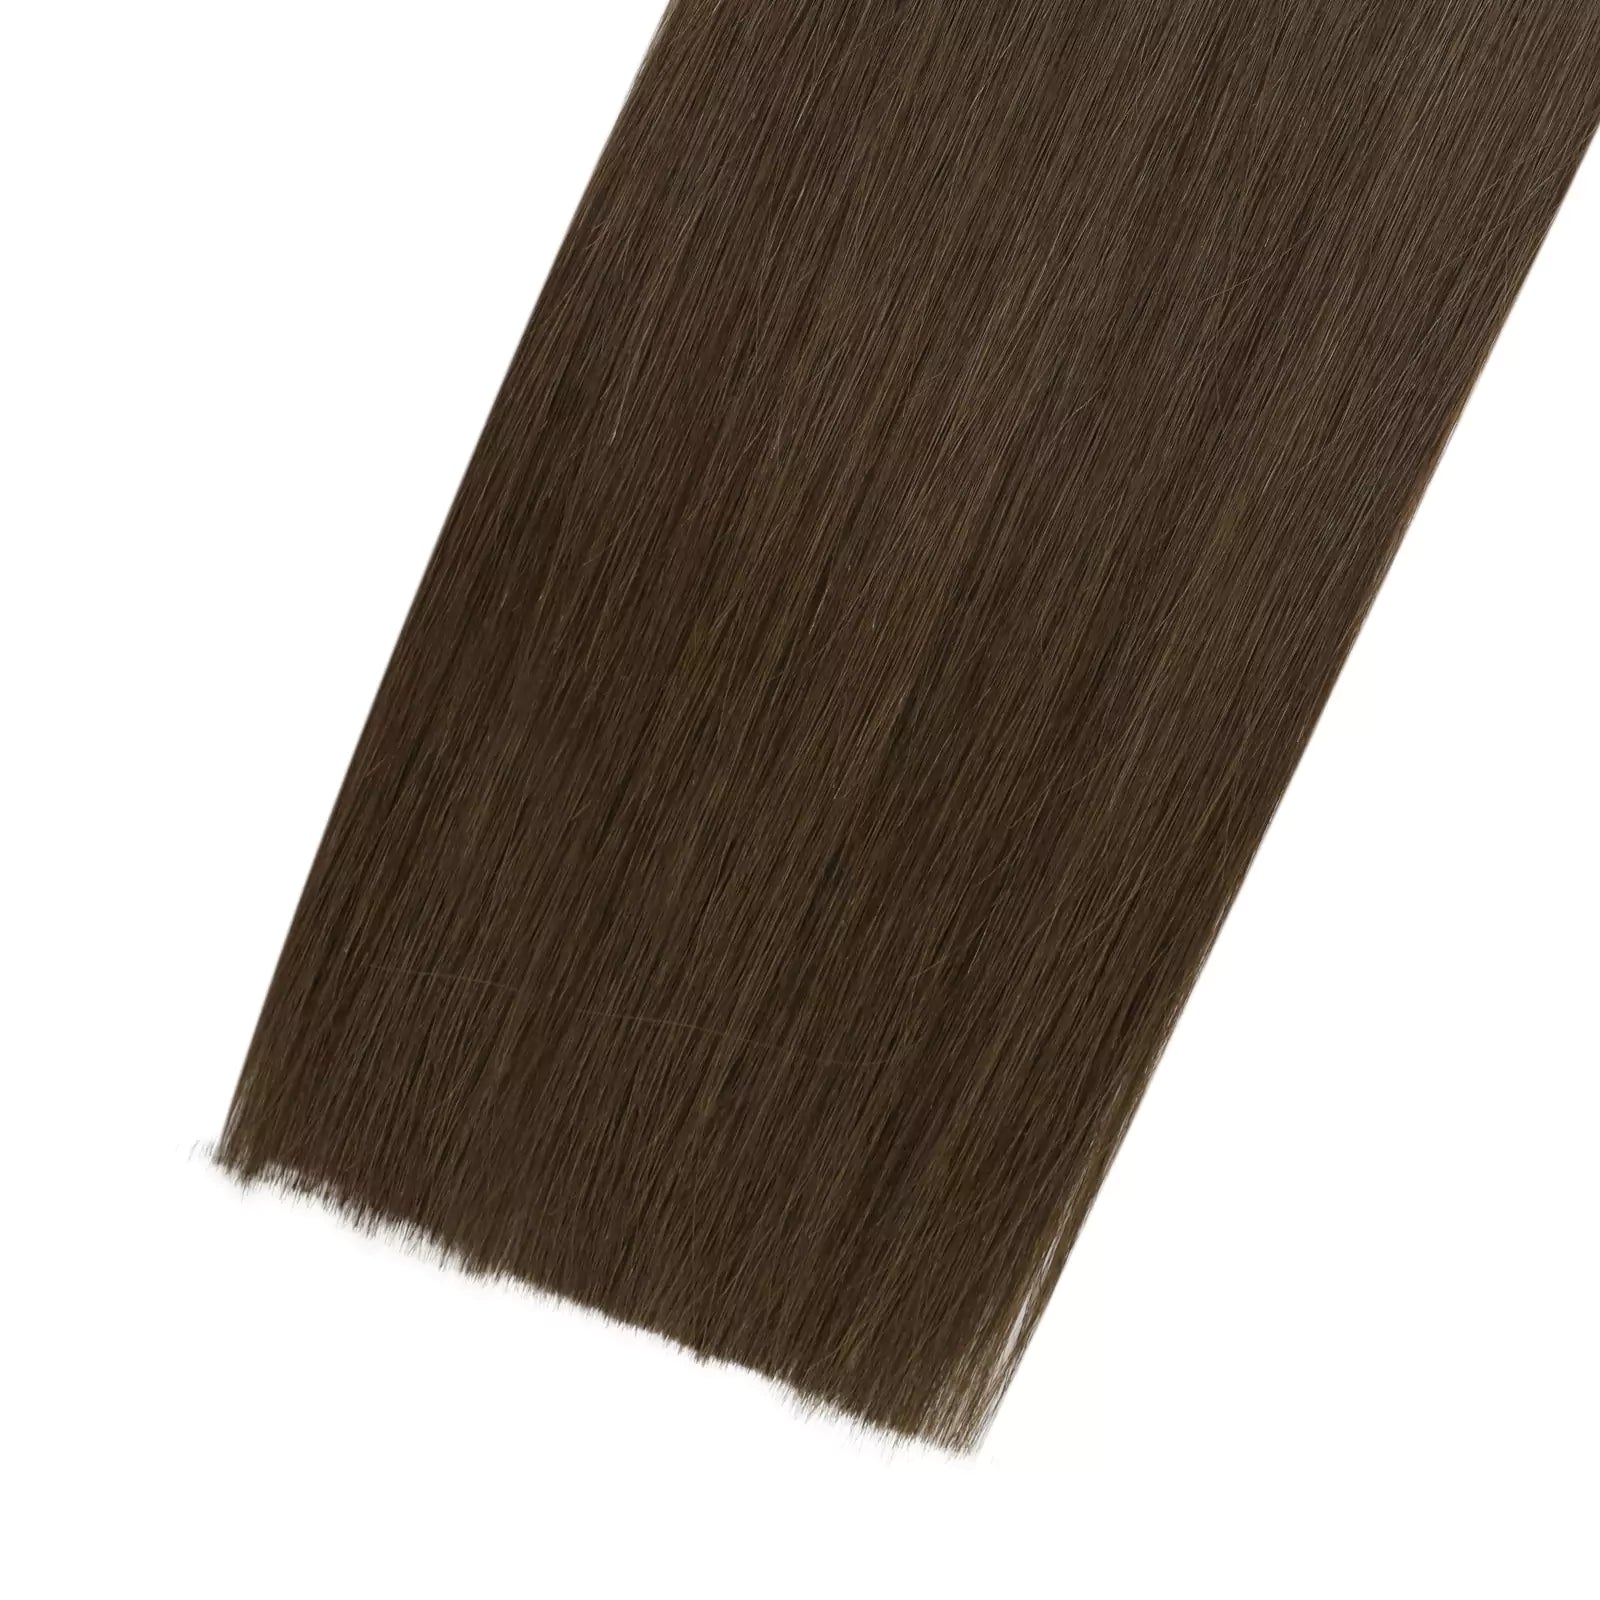 The lightweight nature of the extensions minimizes discomfort, allowing for ease of movement.